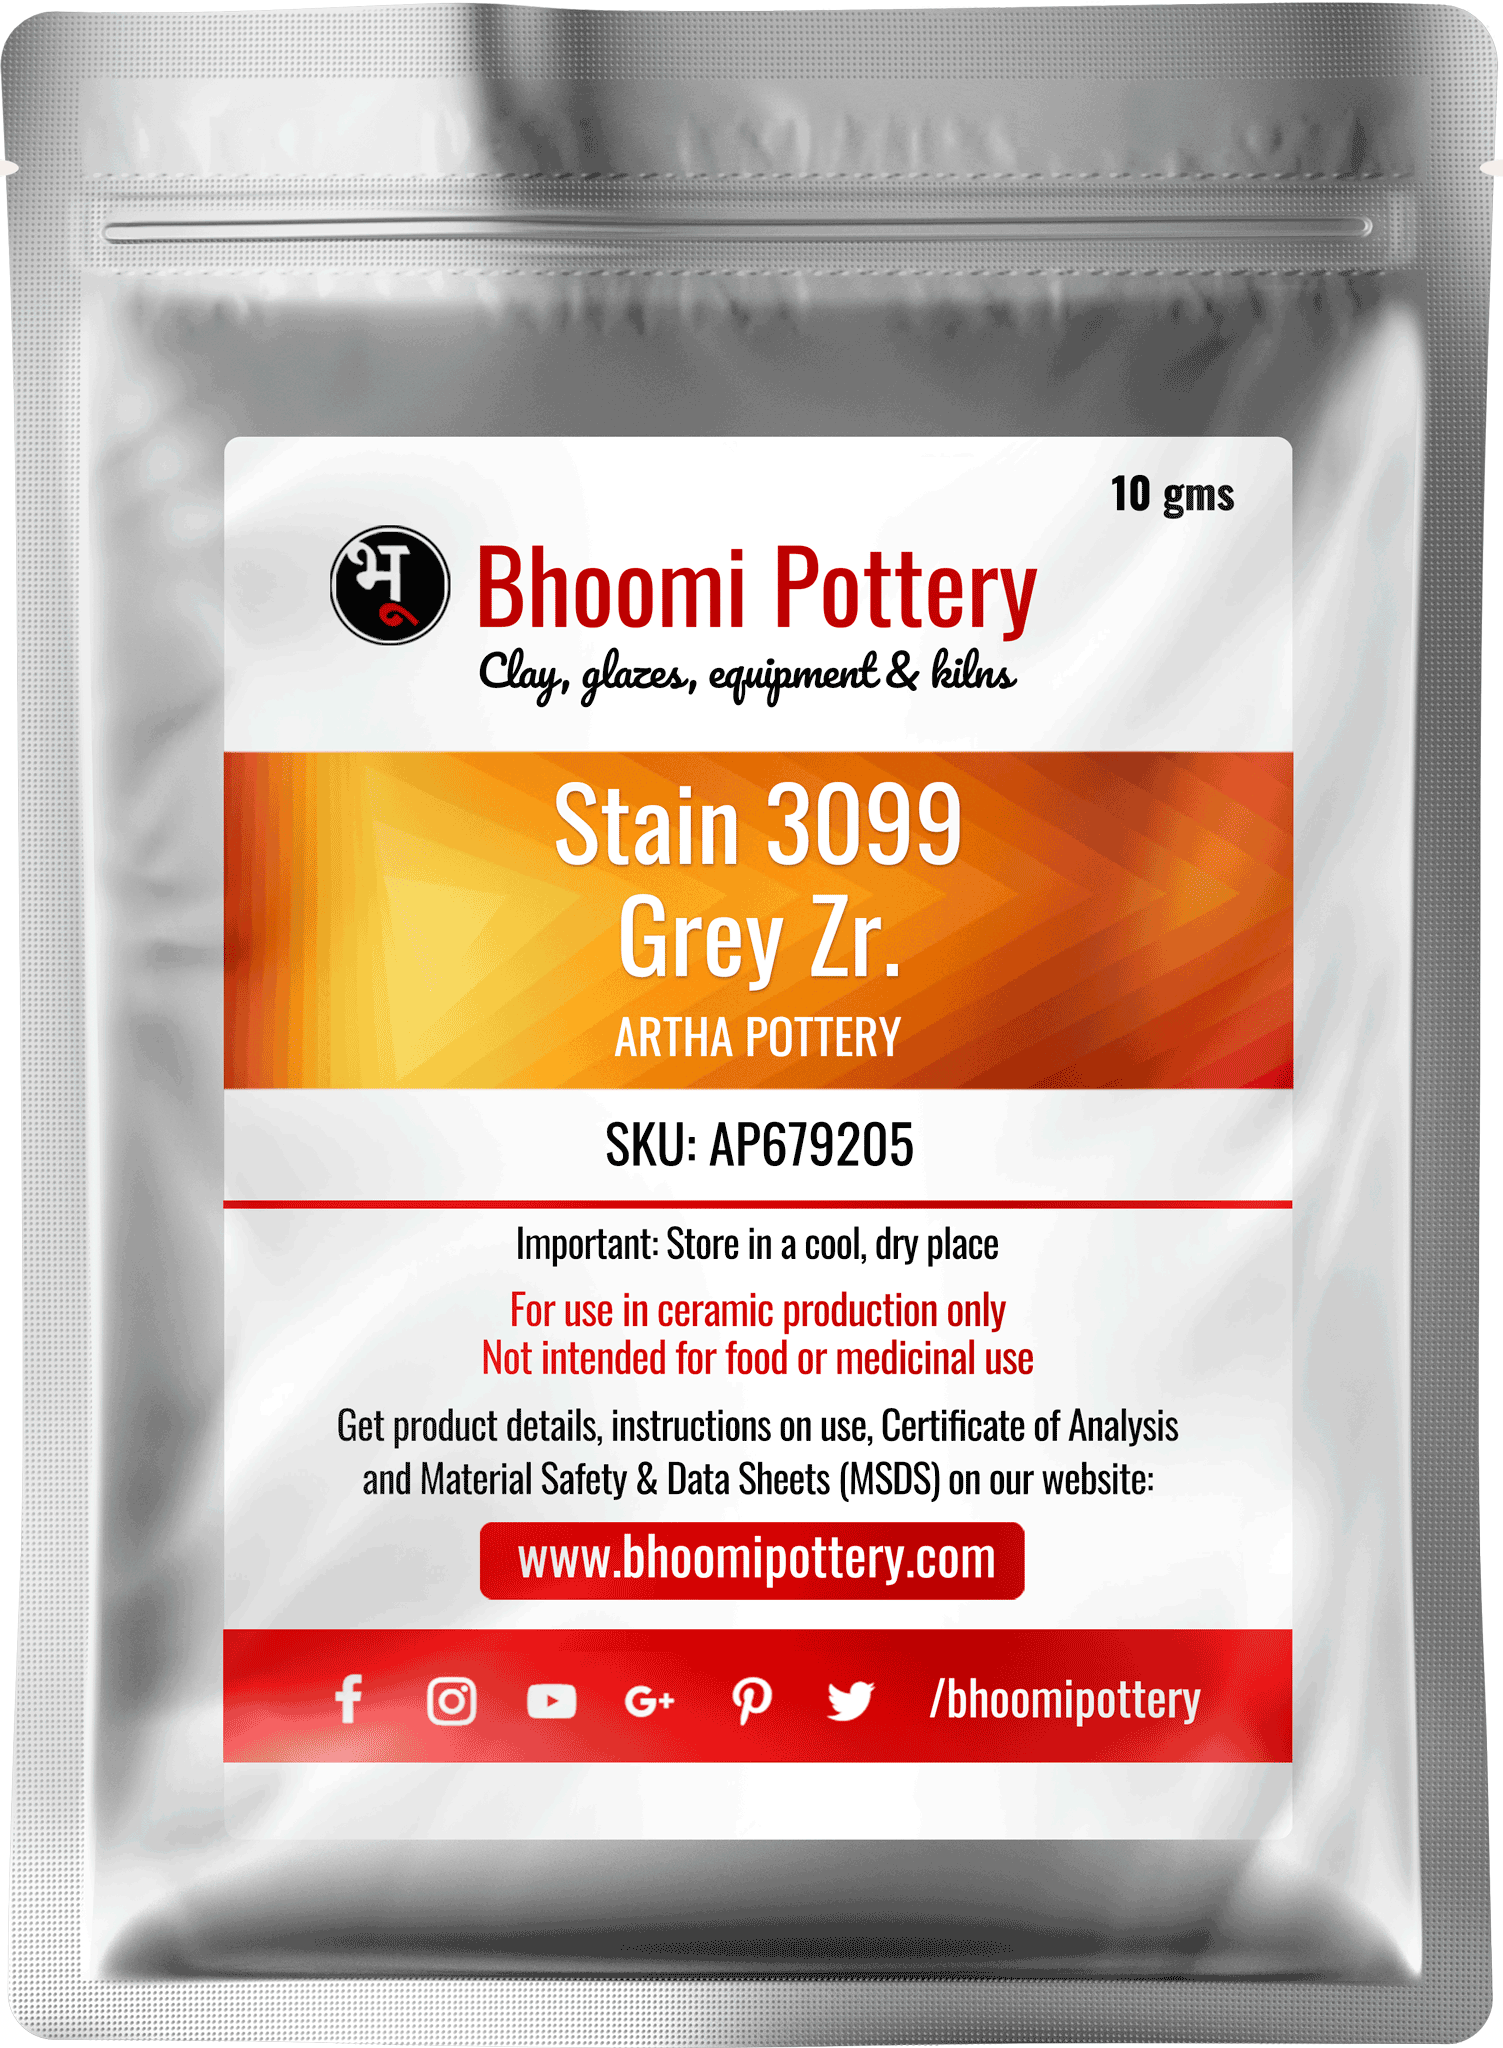 Artha Pottery Stain 3099 Grey Zr. 100 gms for sale in India - Bhoomi Pottery